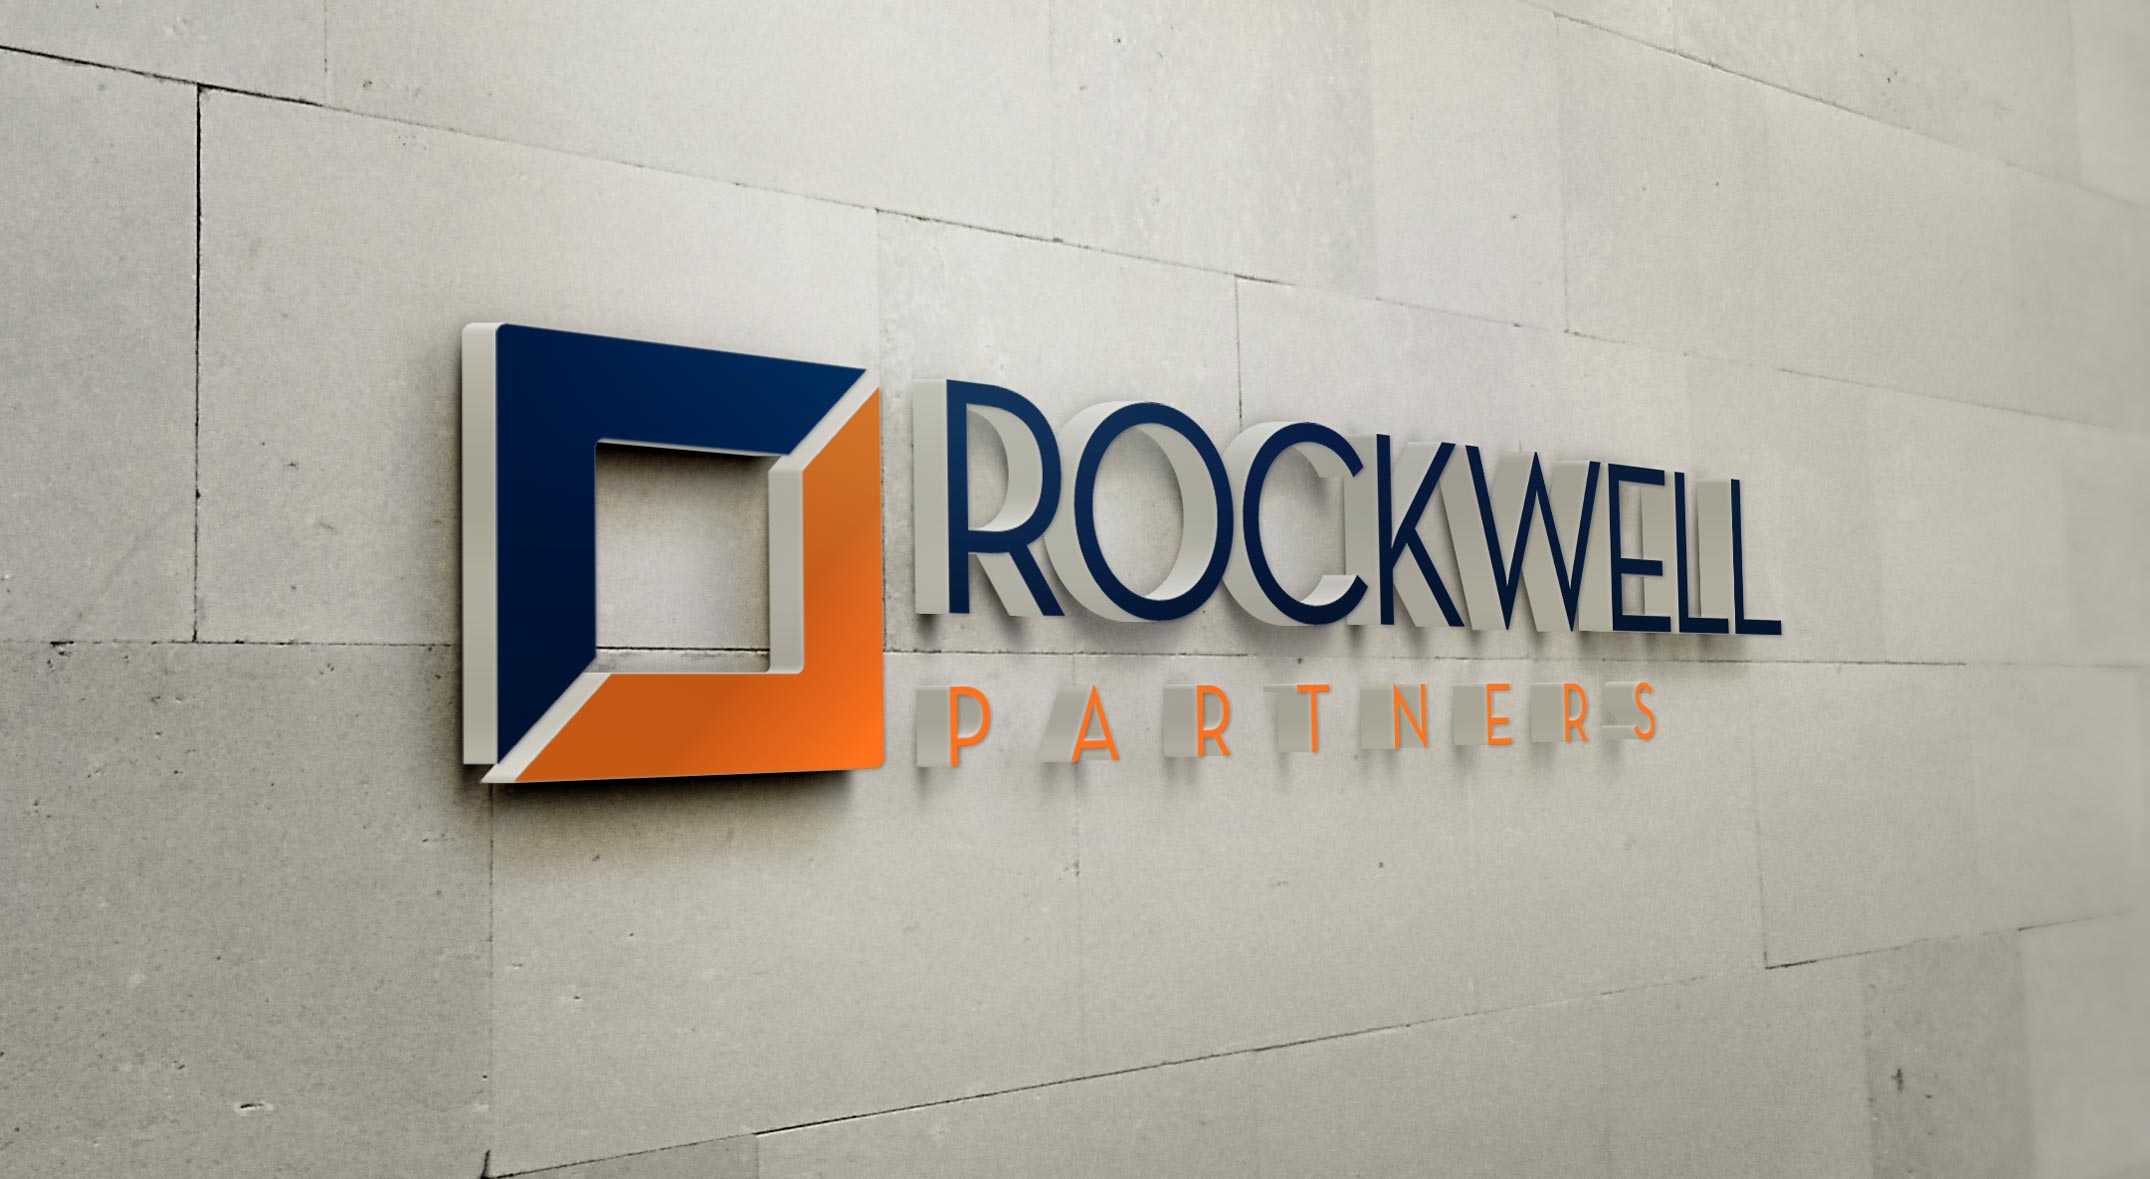 Rockwell Partners Branding Identity Stationary Pieces